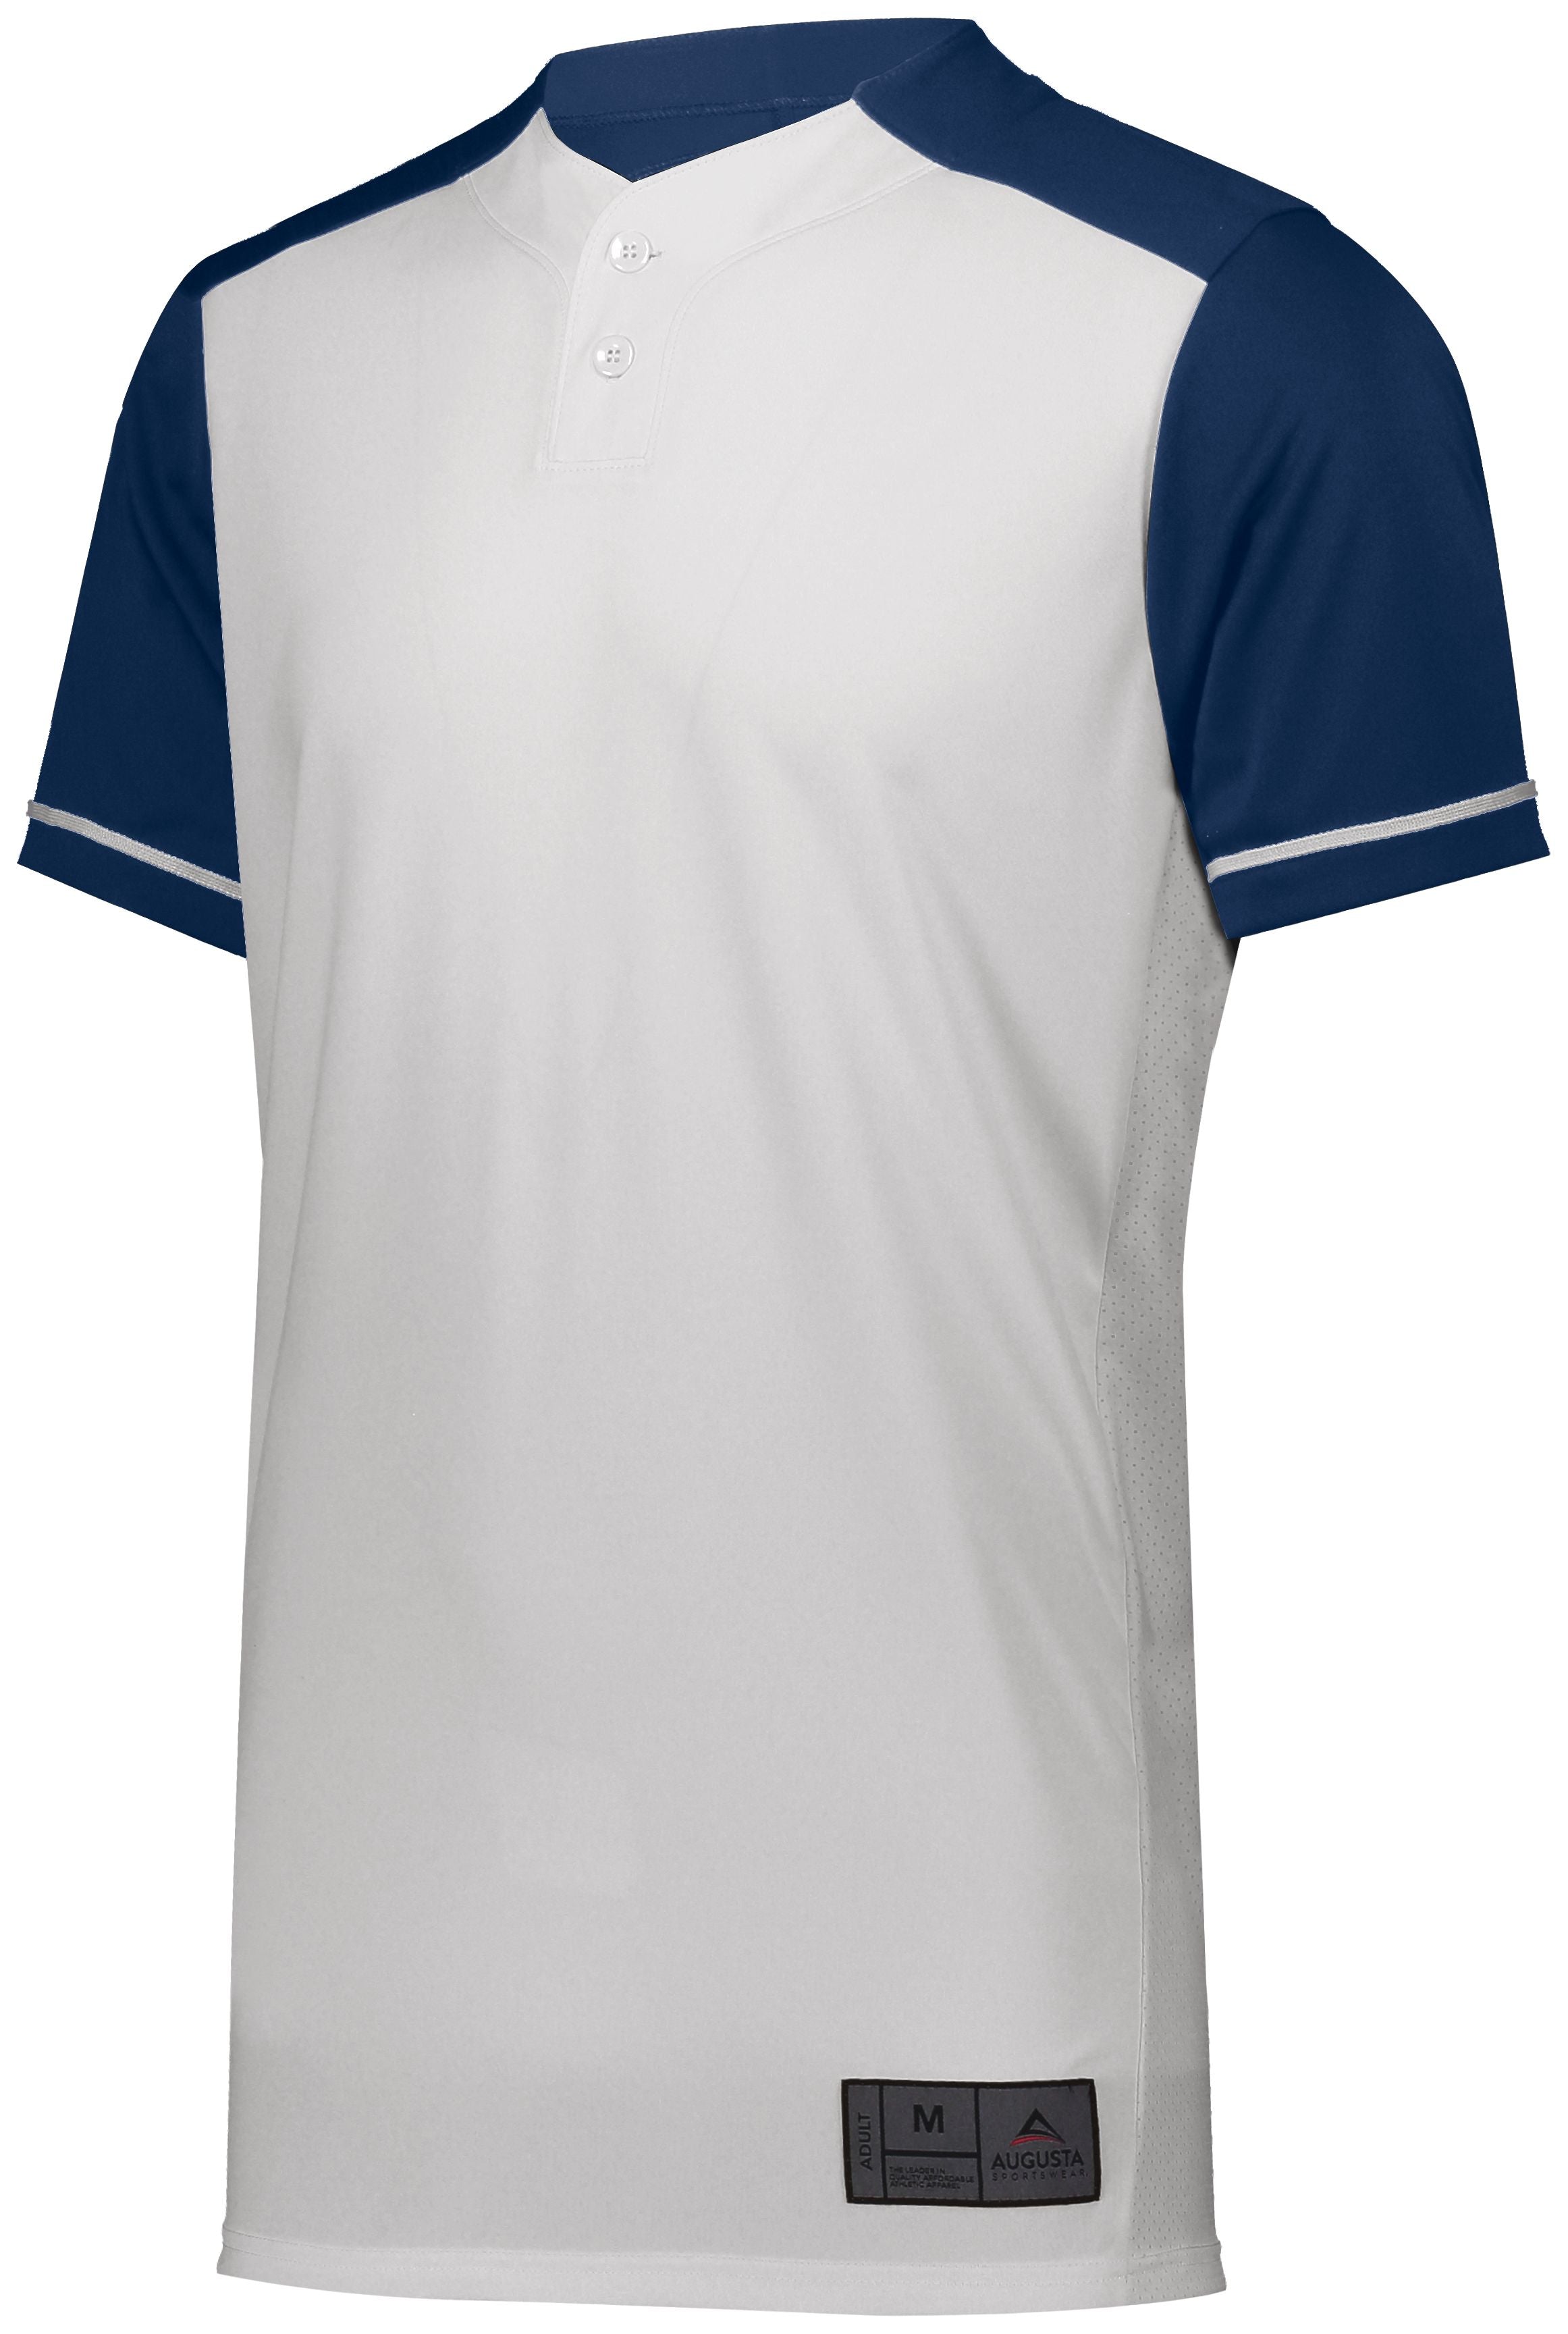 Augusta Sportswear Closer Jersey in White/Navy  -Part of the Adult, Adult-Jersey, Augusta-Products, Baseball, Shirts, All-Sports, All-Sports-1 product lines at KanaleyCreations.com